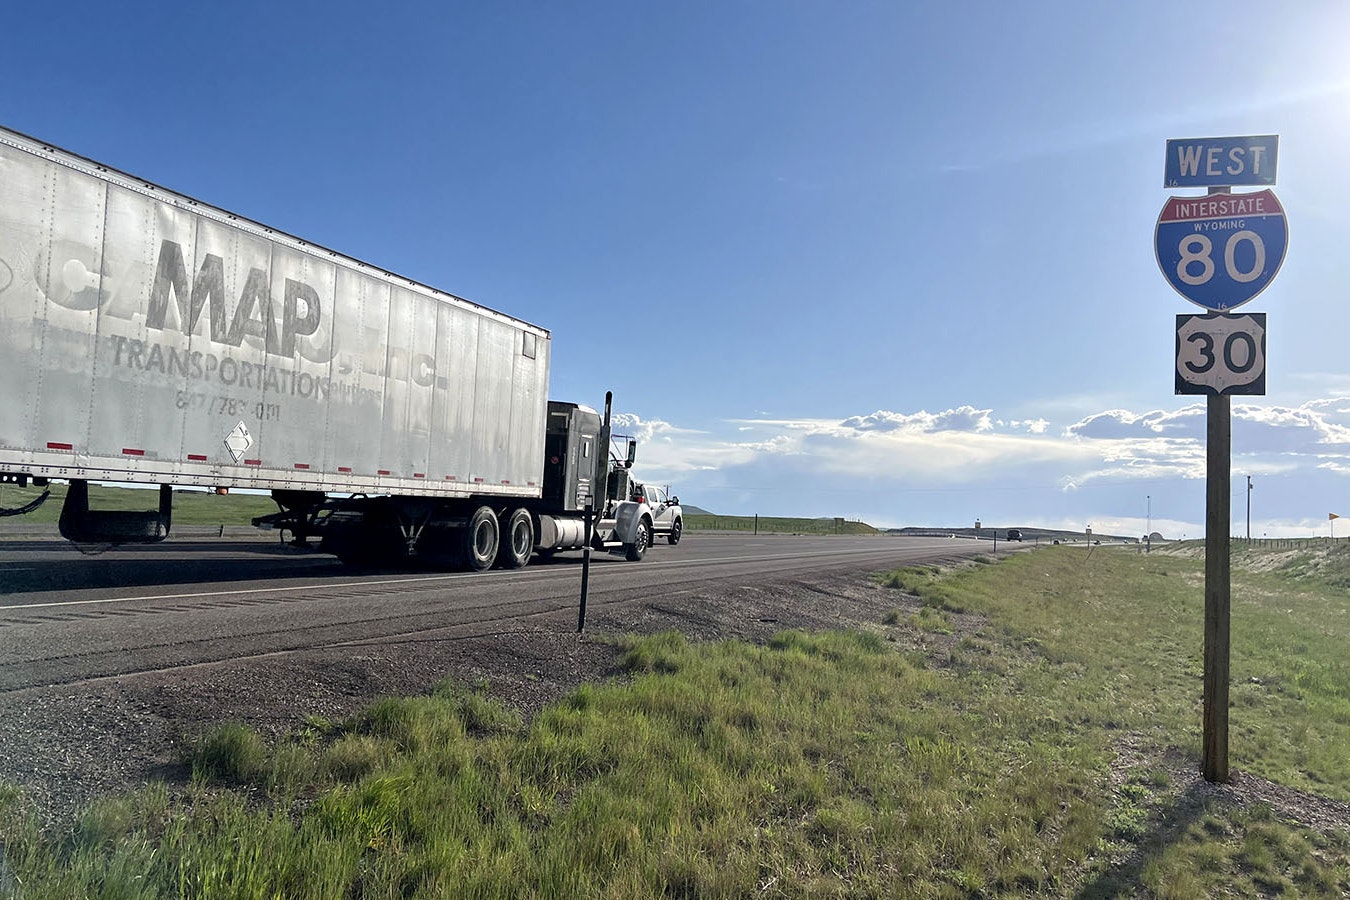 Wyoming Department of Transportation data shows that 90% of commercial vehicle crashes along Interstate 80 through the Cowboy State involve out-of-state drivers.